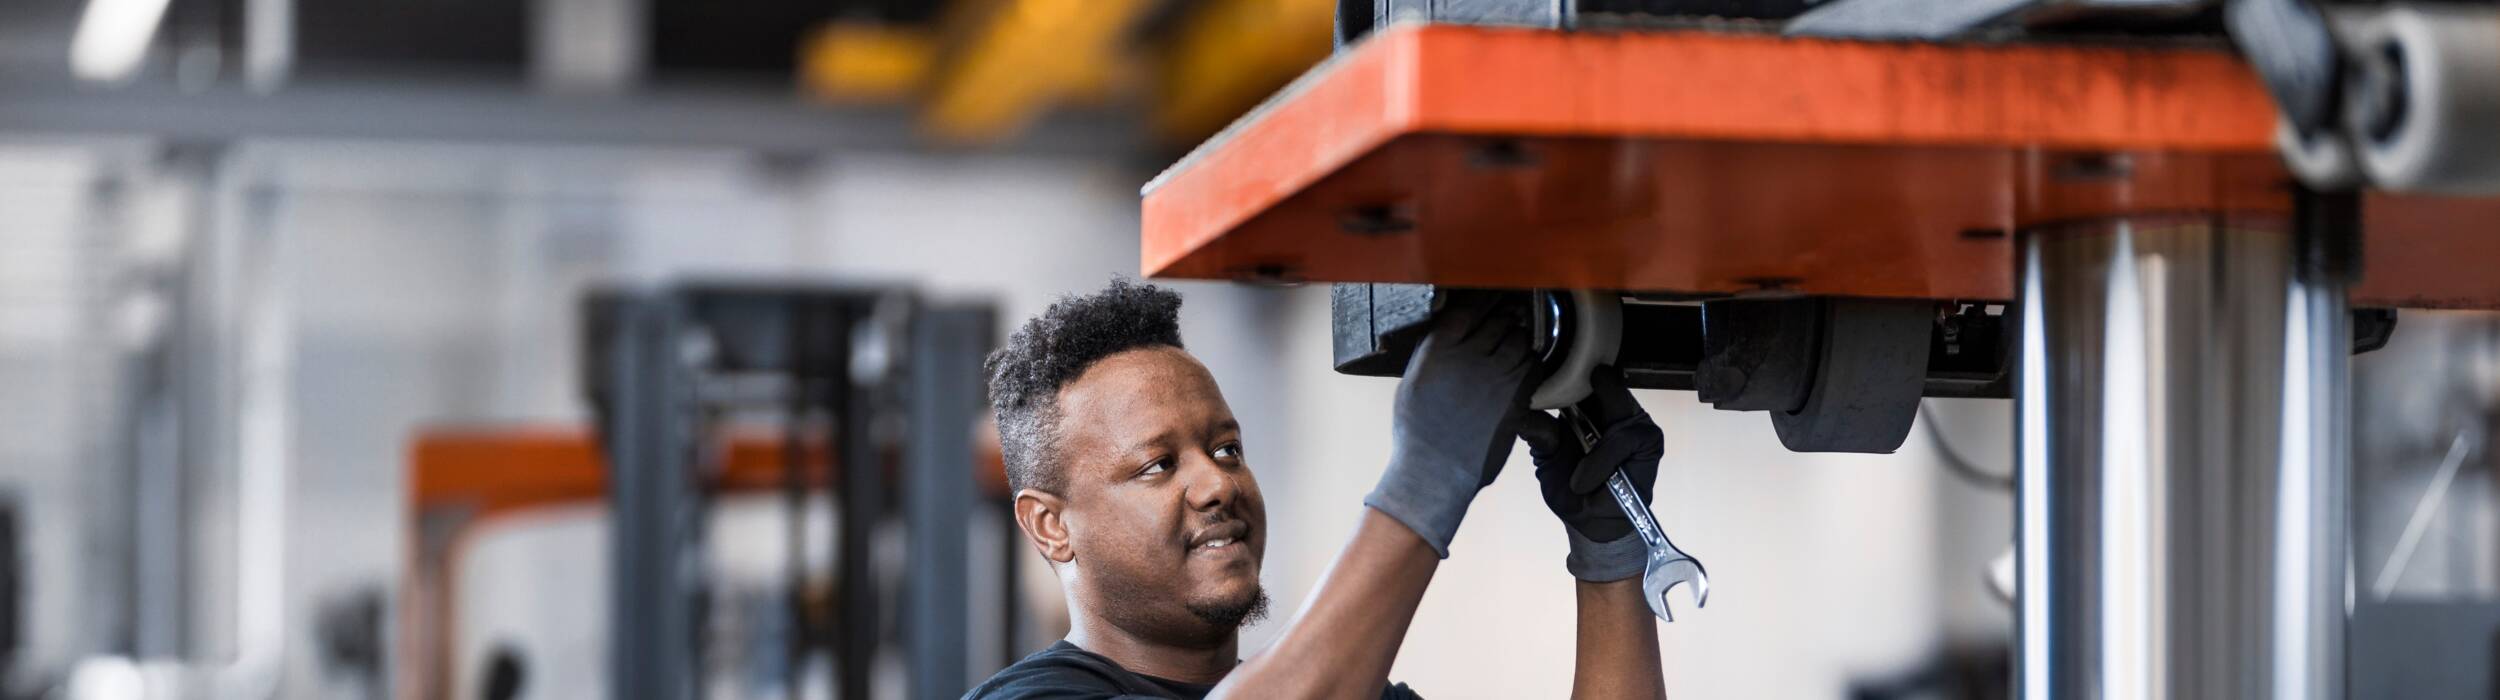 toyota technician working on forklift truck